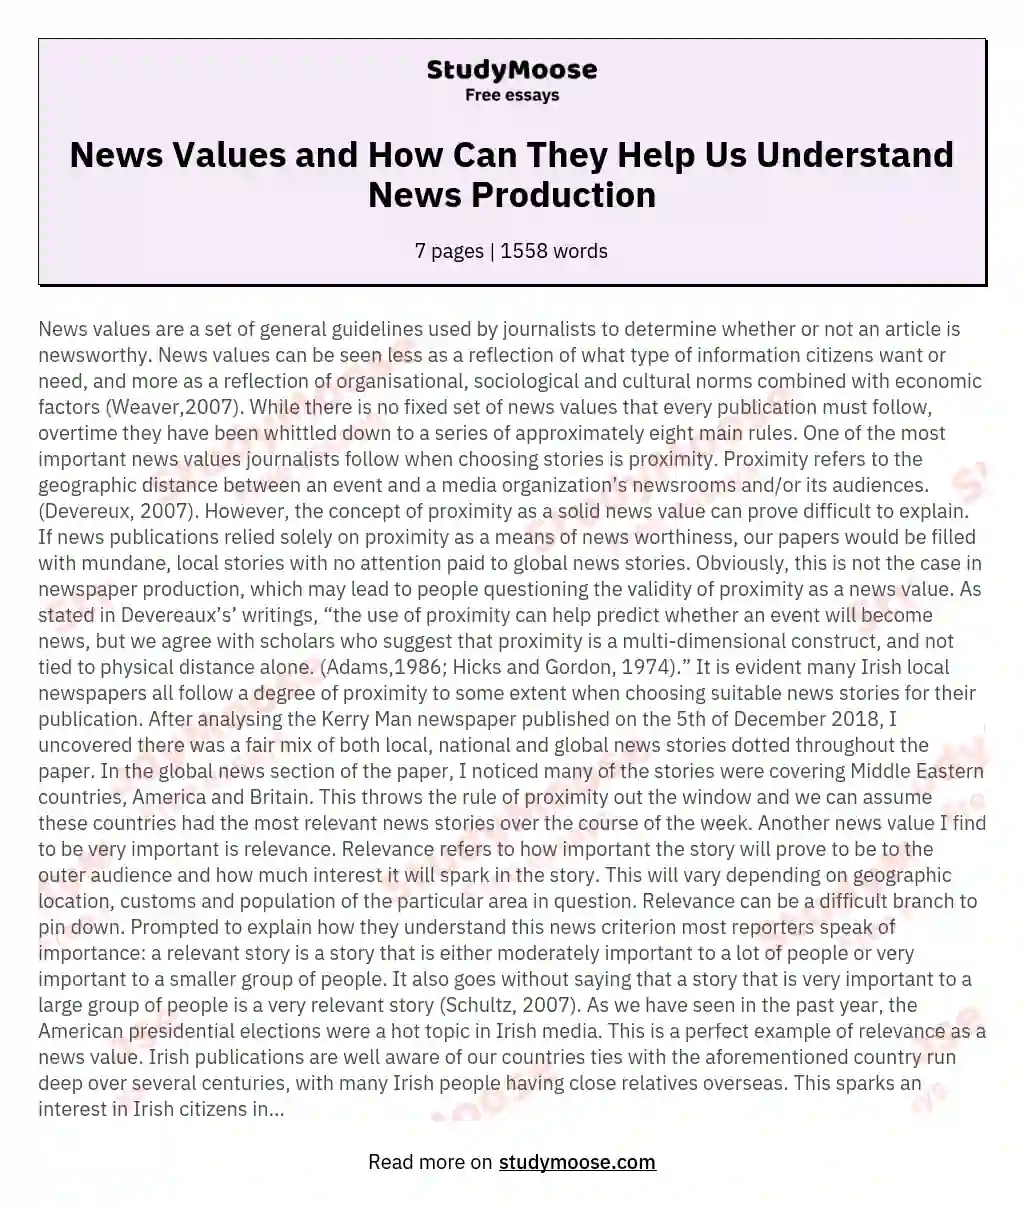 News Values and How Can They Help Us Understand News Production